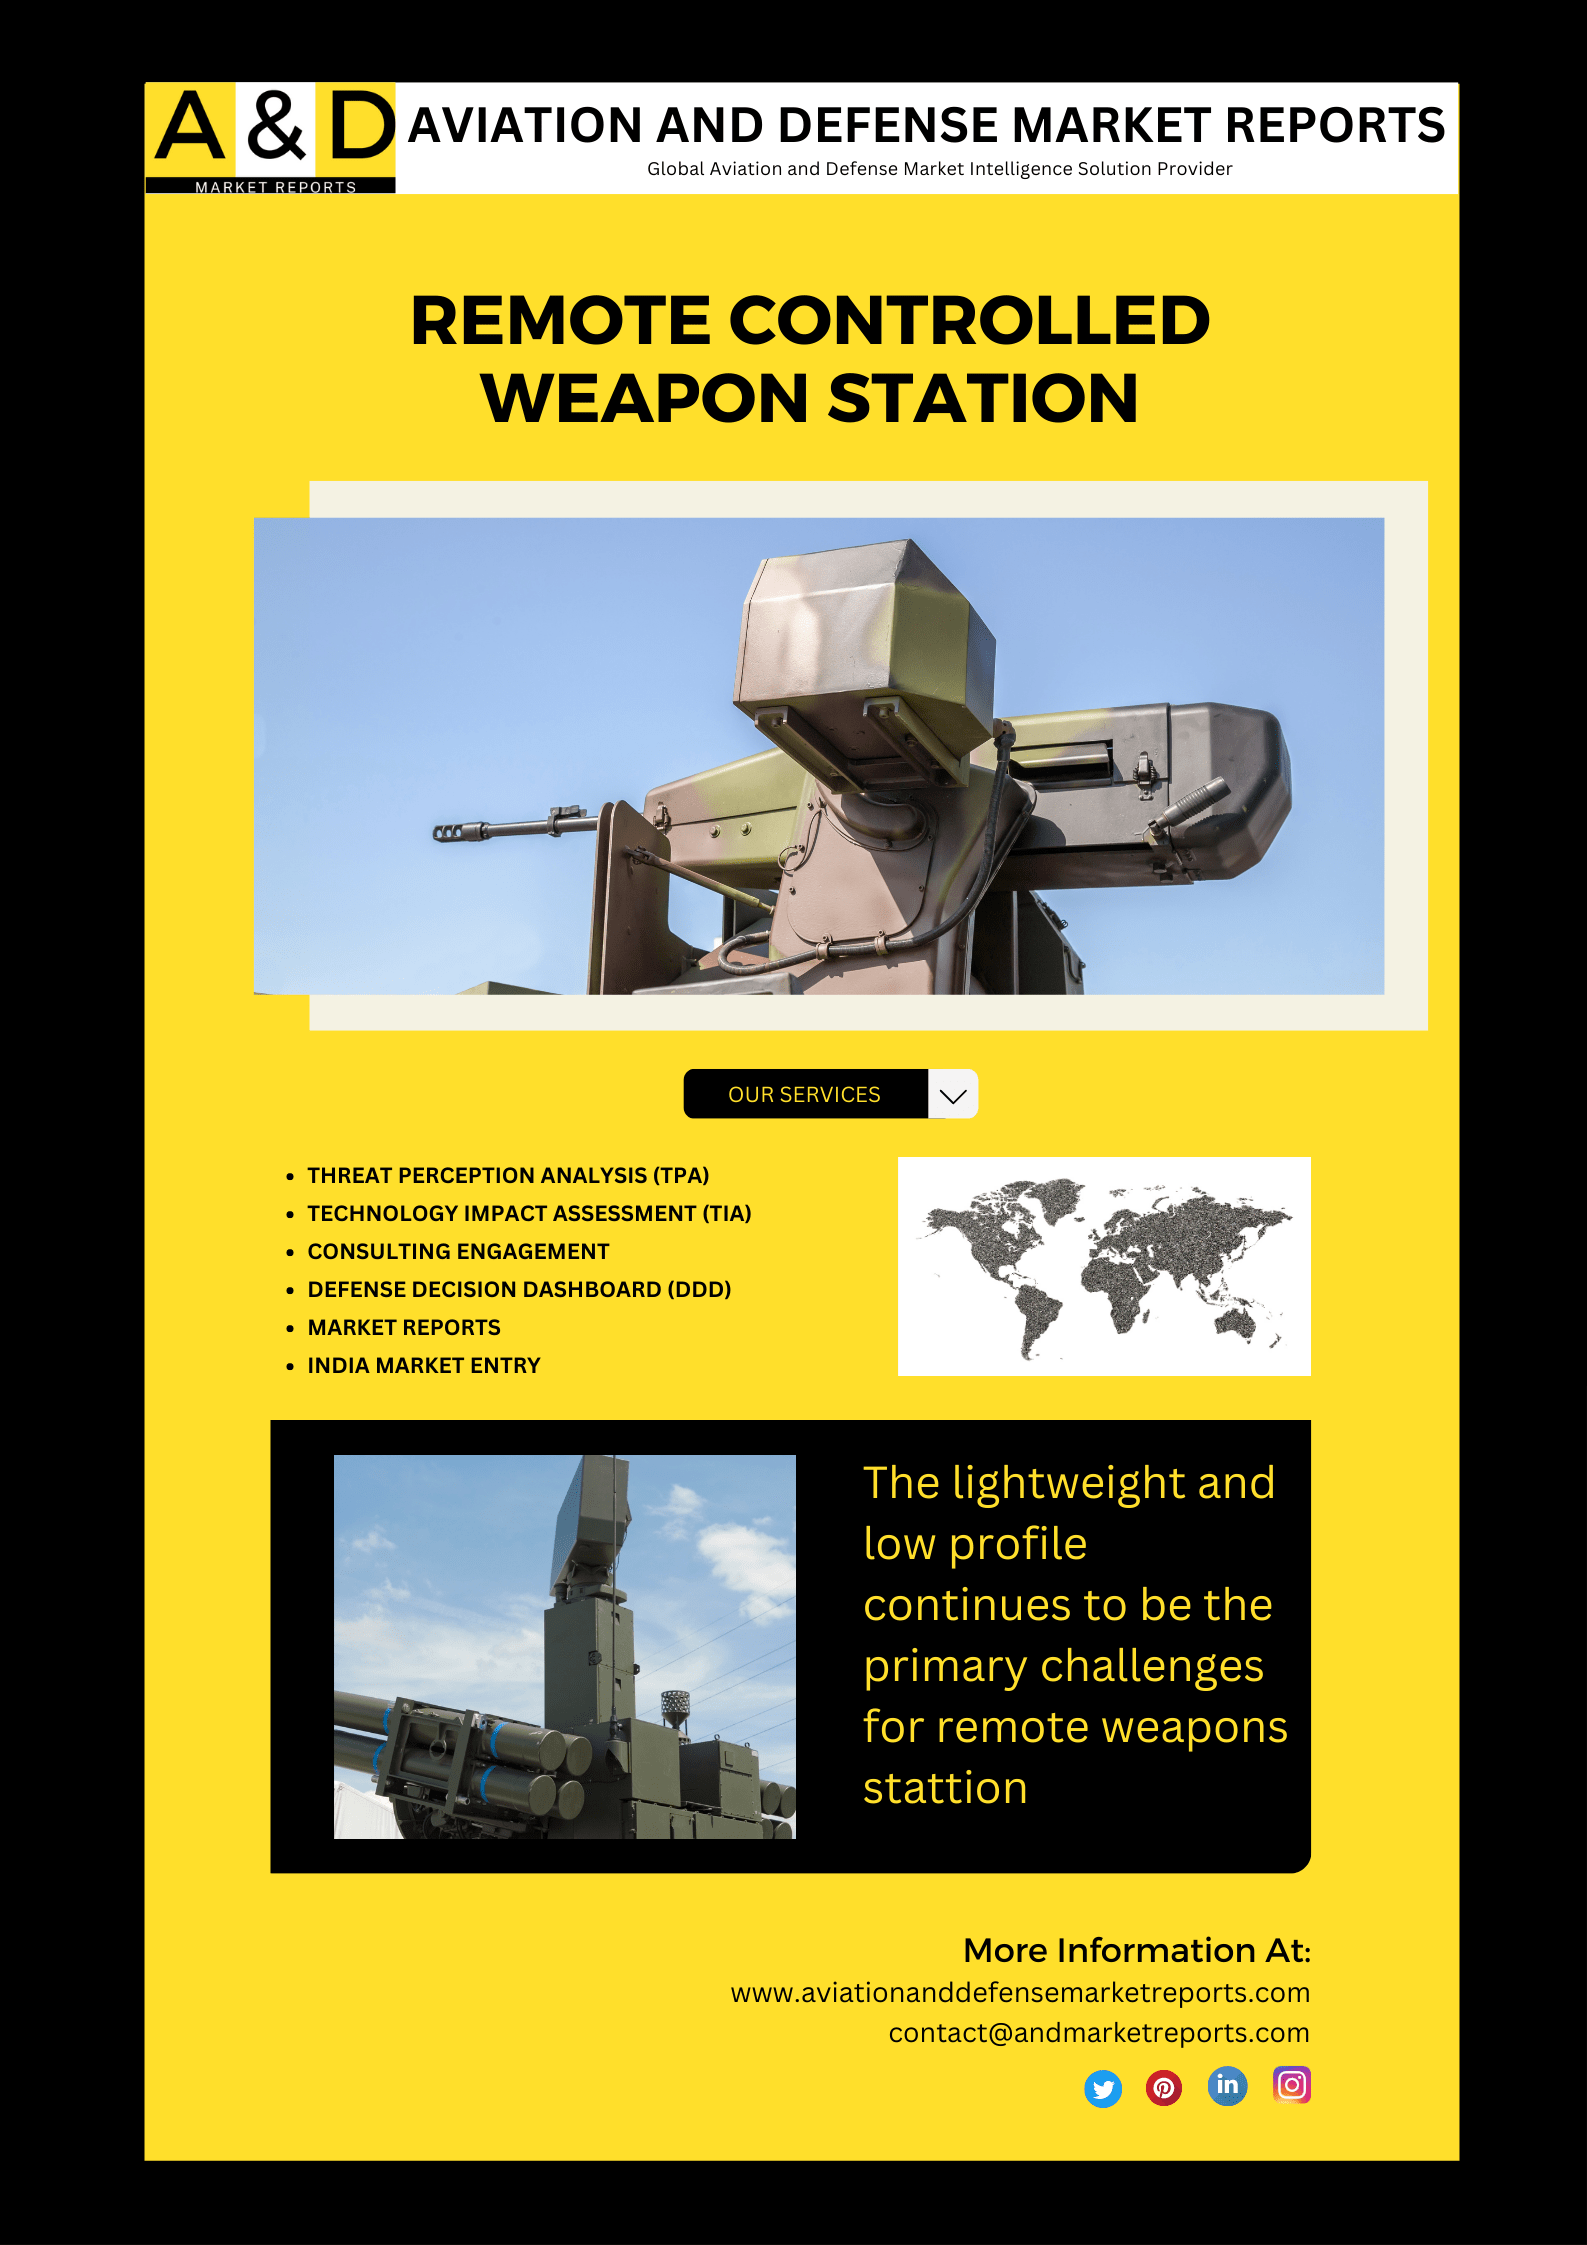 The Size and Integration Of AI Will Be A Considerable Challenge For Remote-Controlled Weapons Stations